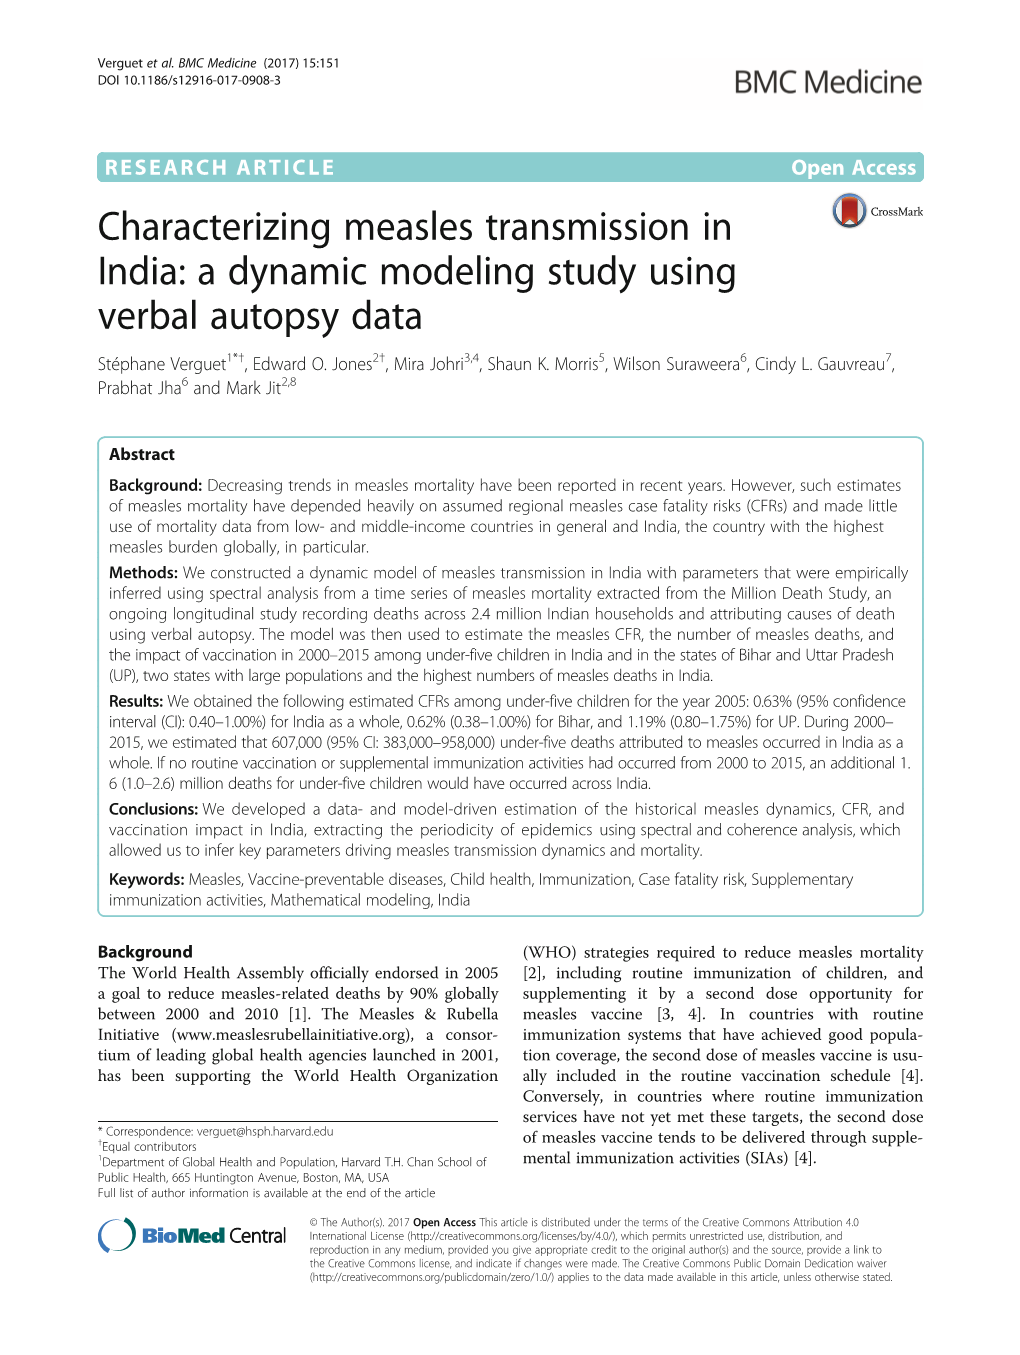 Characterizing Measles Transmission in India: a Dynamic Modeling Study Using Verbal Autopsy Data Stéphane Verguet1*†, Edward O